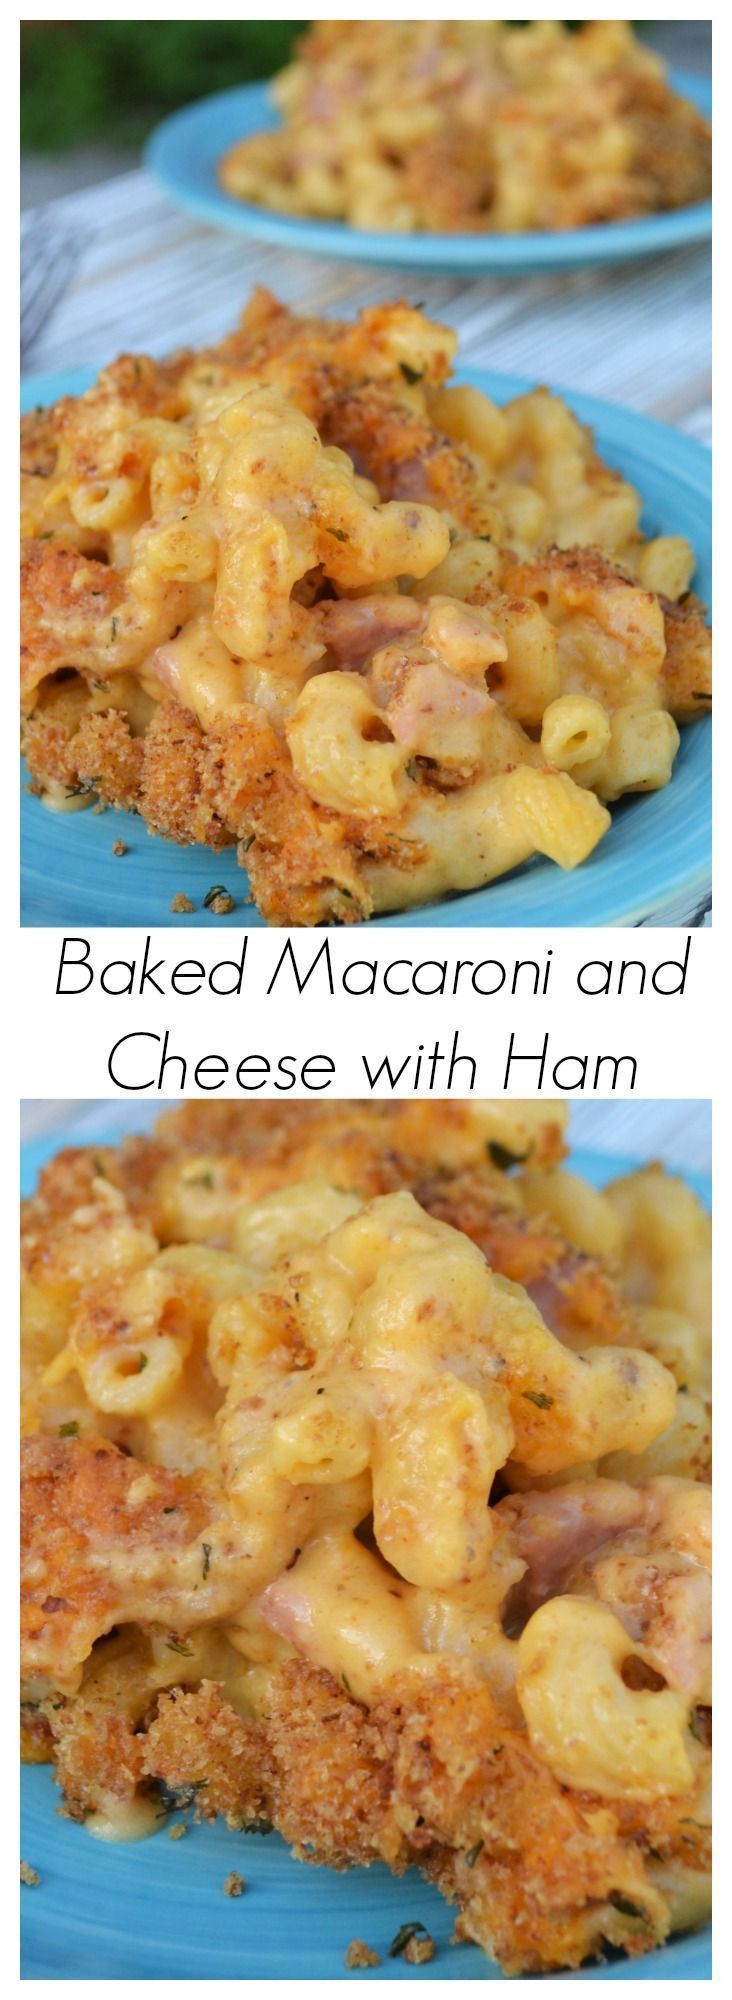 Baked Macaroni And Cheese With Ham Recipe
 Baked Macaroni and Cheese with Ham Recipe